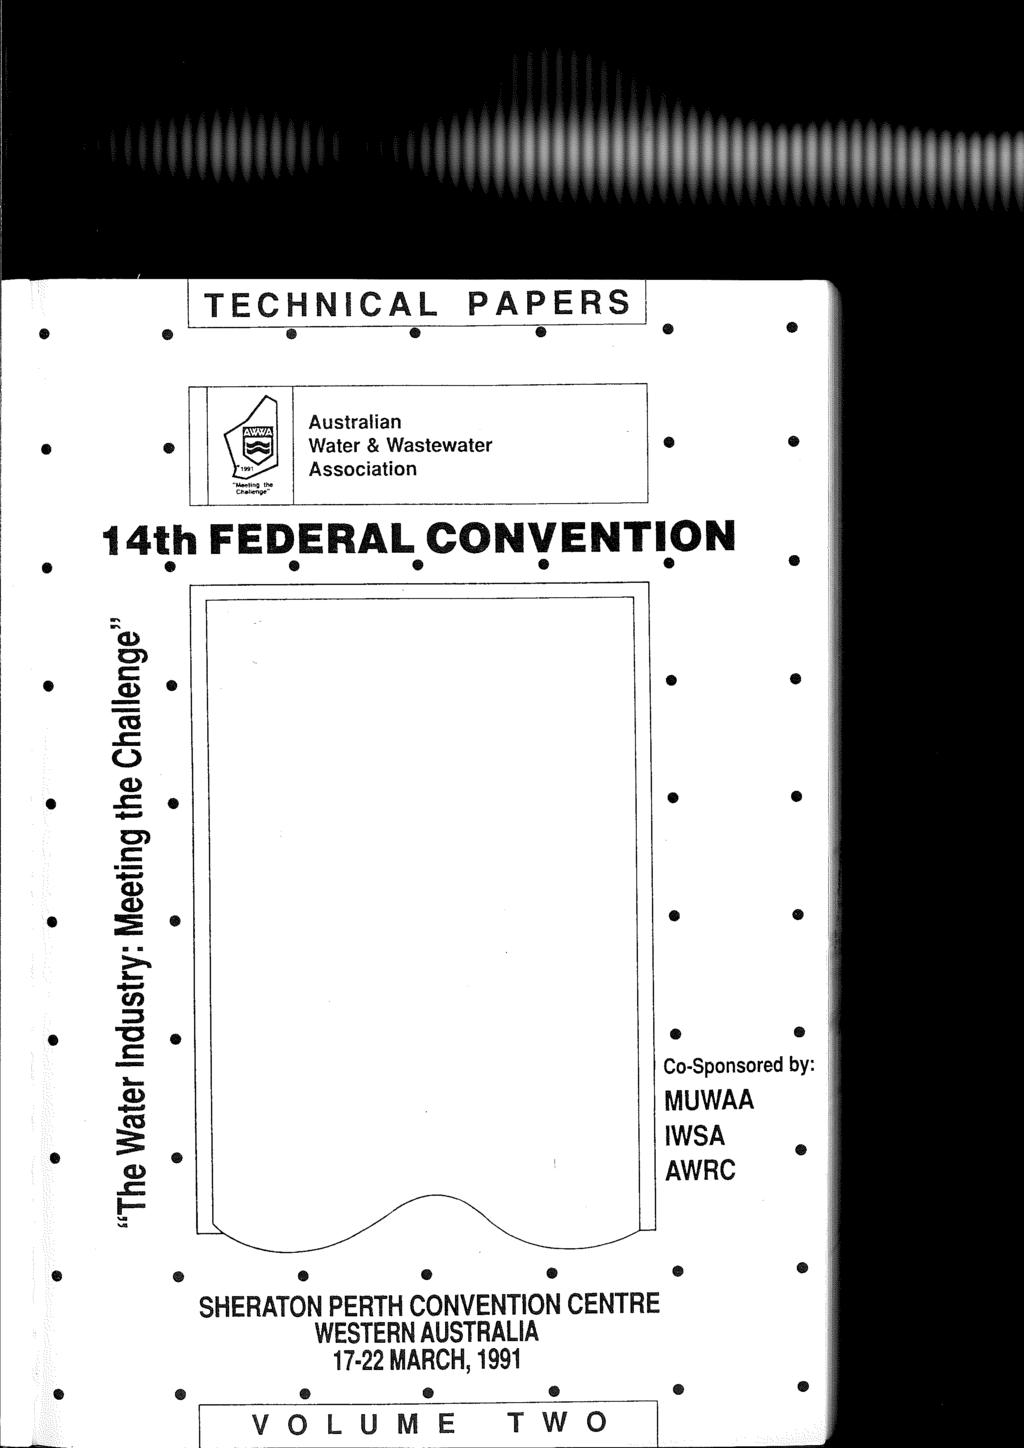 TECHNICAL PAPERS ~ Australian "Meeting the Chehen~w Water & Wastewater Association 14th FEDERAL CONVENTION... 0') a; e I I - ca I I e.j:: (.).J::... " I I e 0') s:::... - e I I I I e ::5.